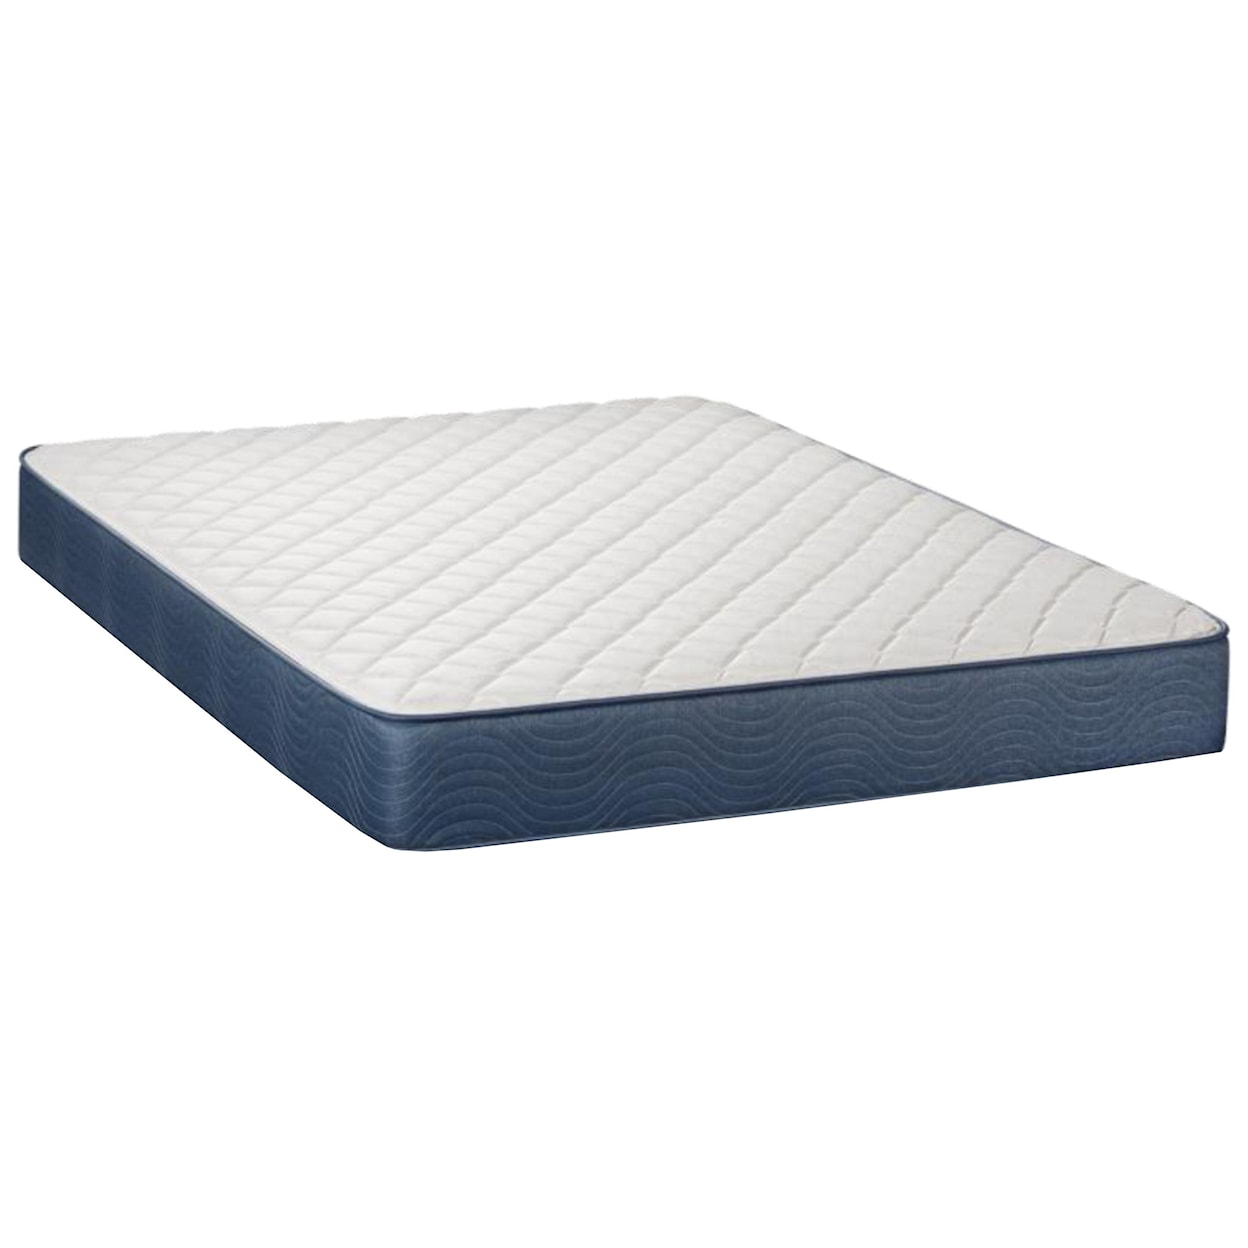 Restonic Sumner Firm Full 9" Firm Two Sided Mattress